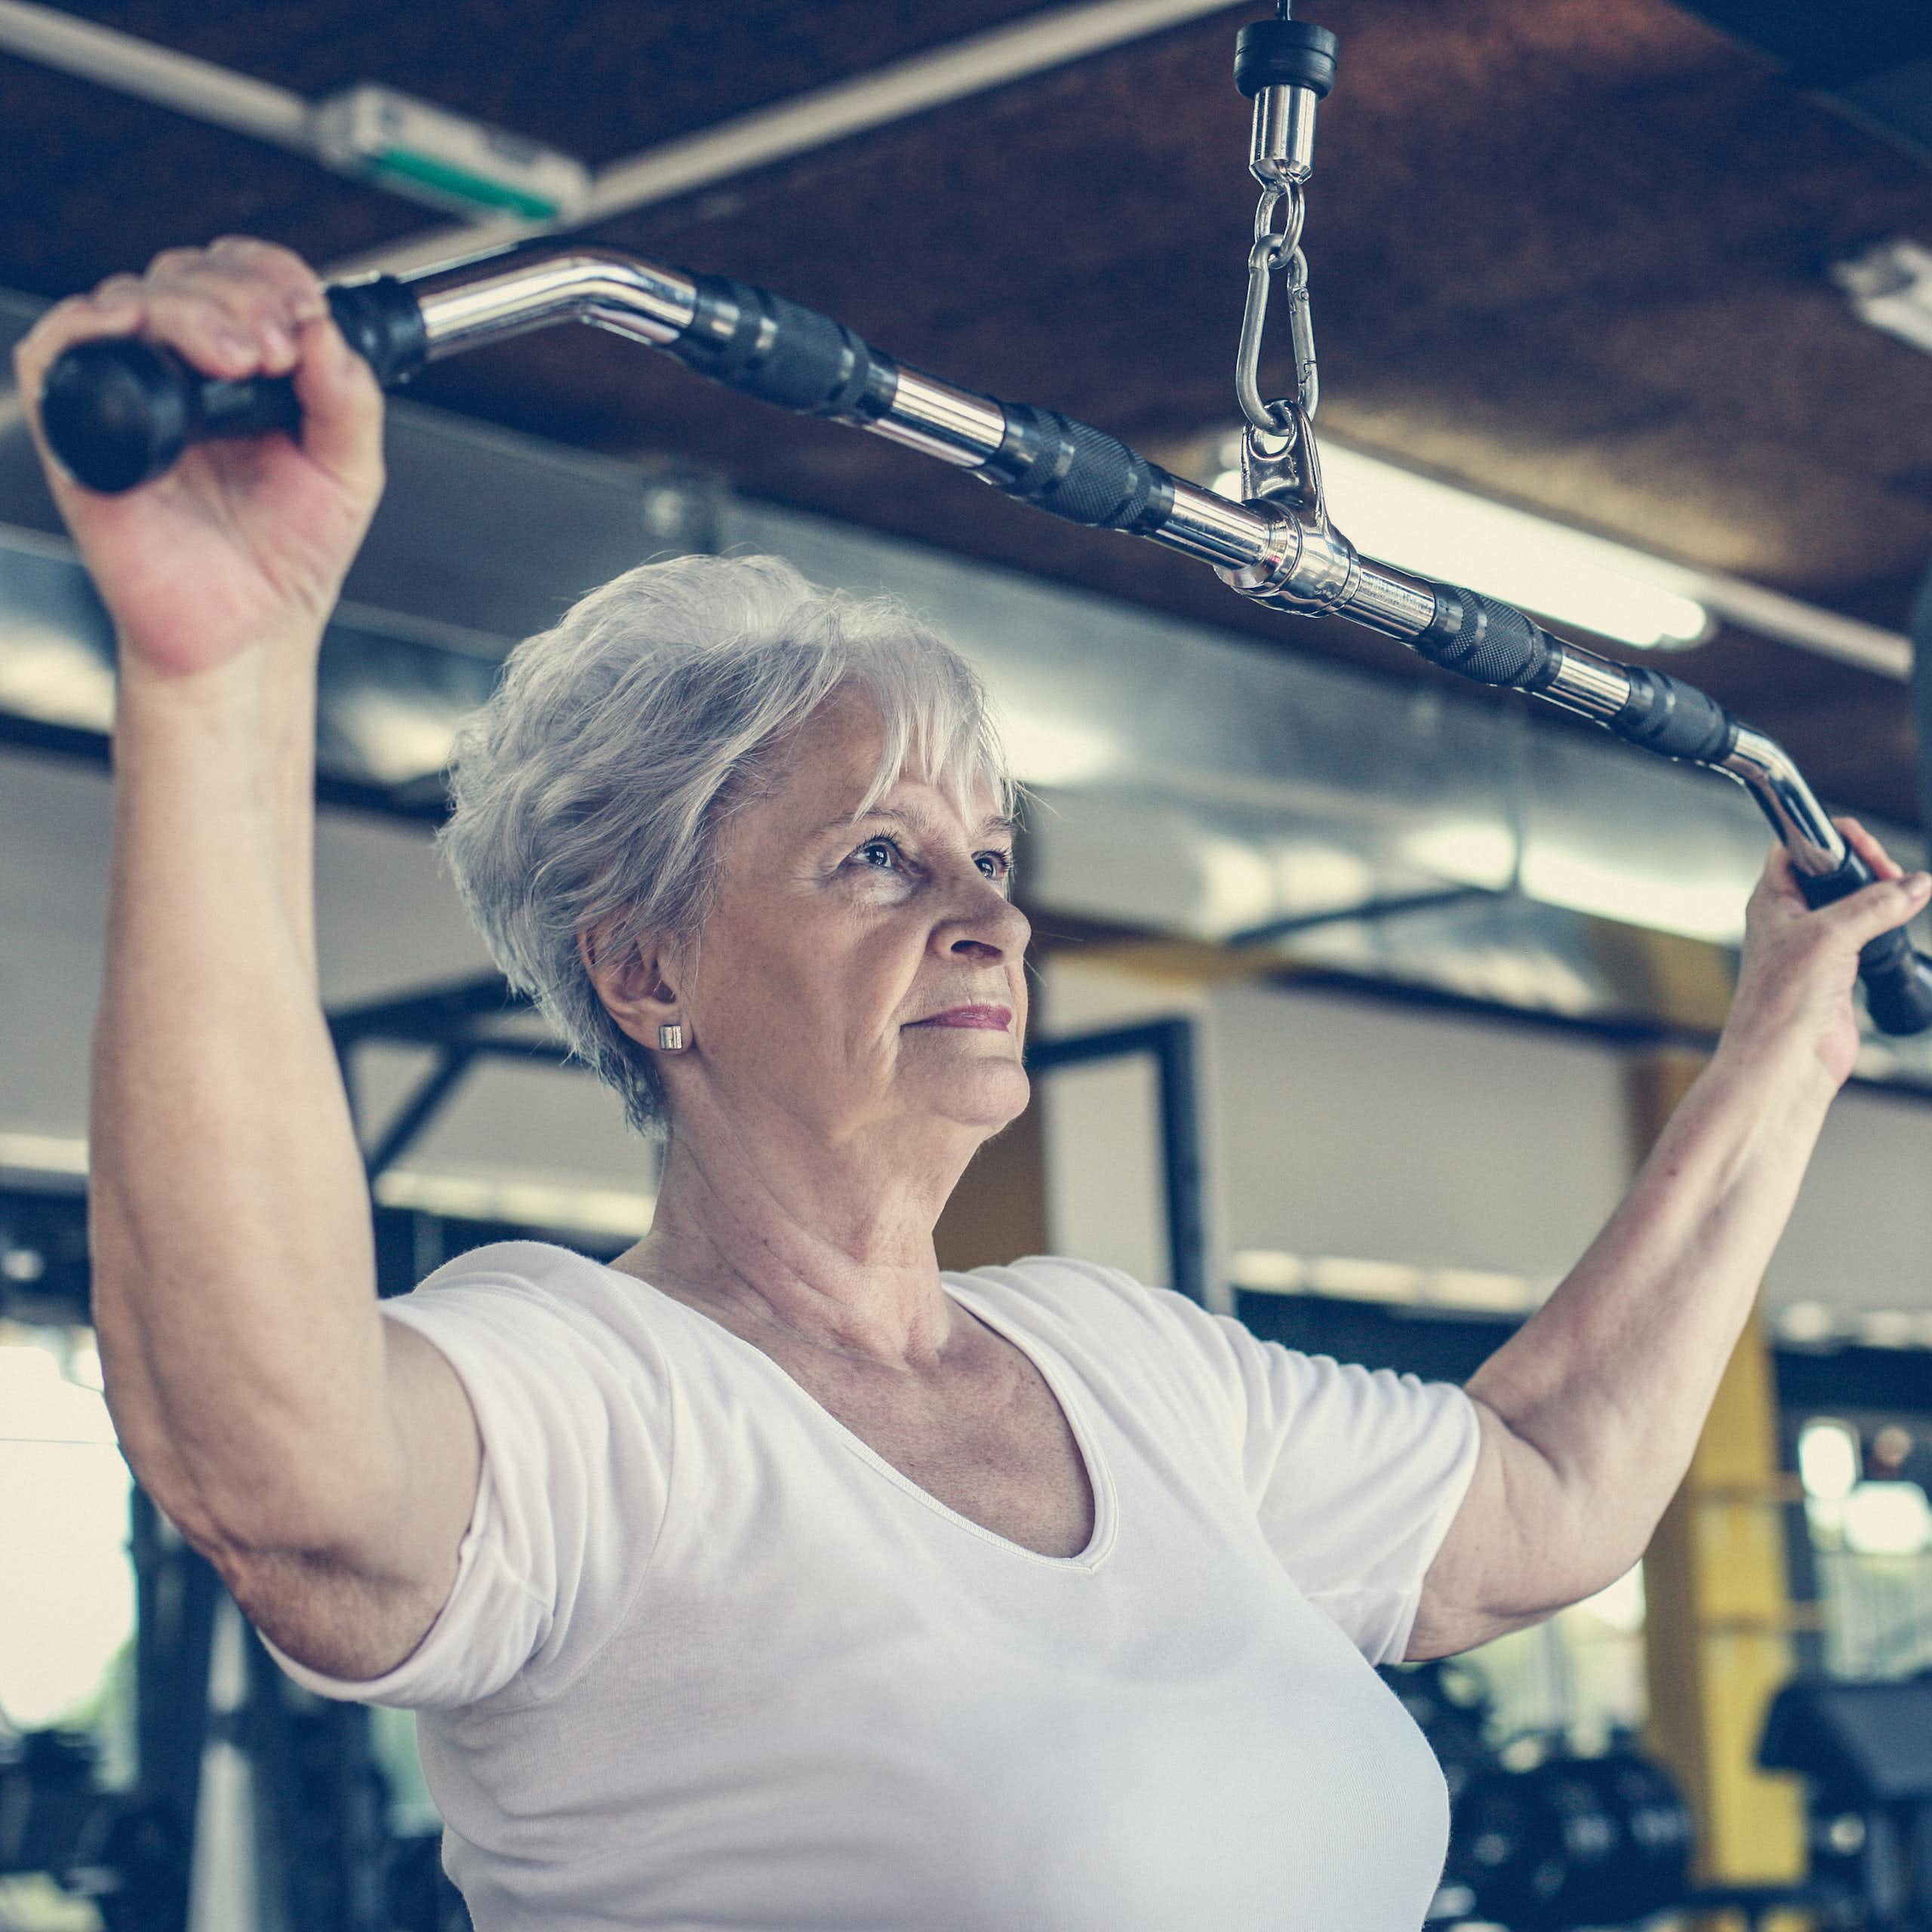 An older woman uses an exercise machine to train her arm muscles.